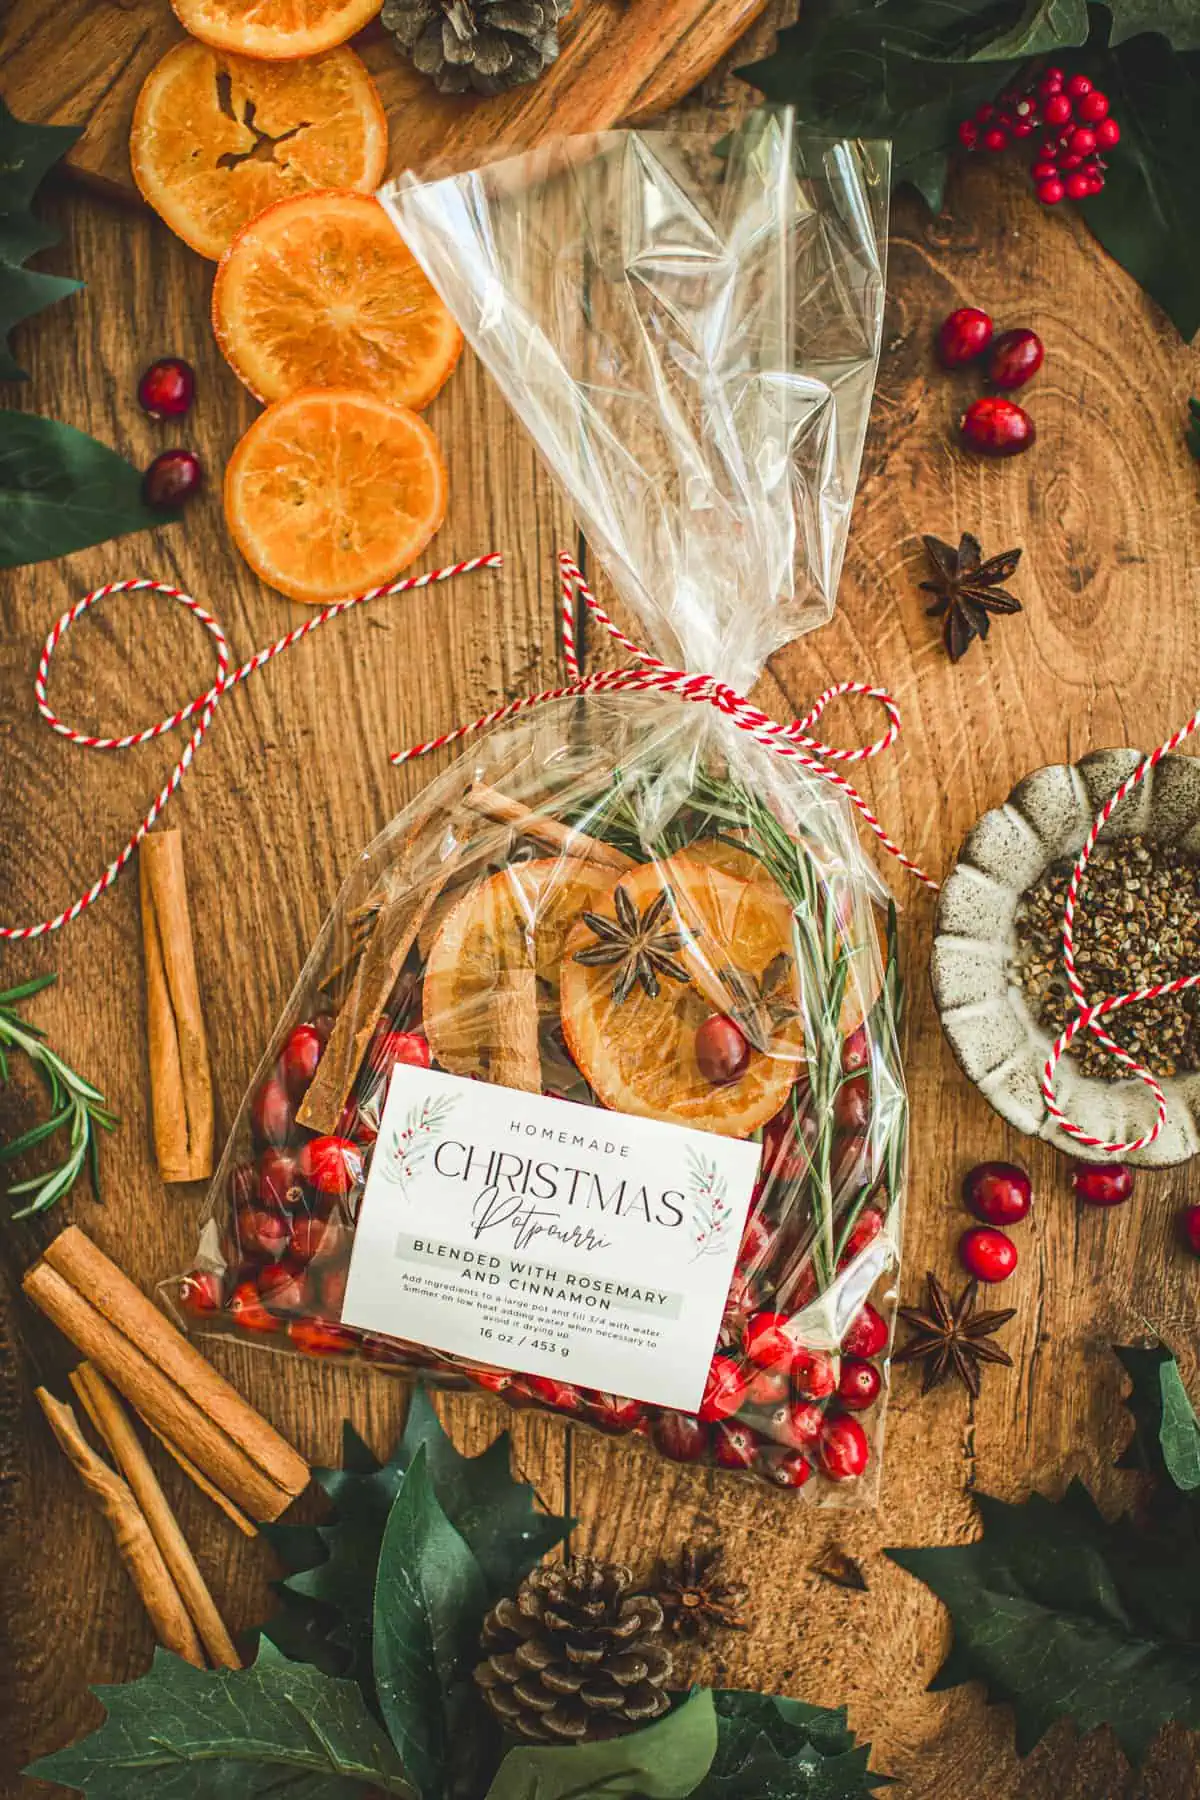 Christmas potpourri in a bag tied with string and ingredients around it.